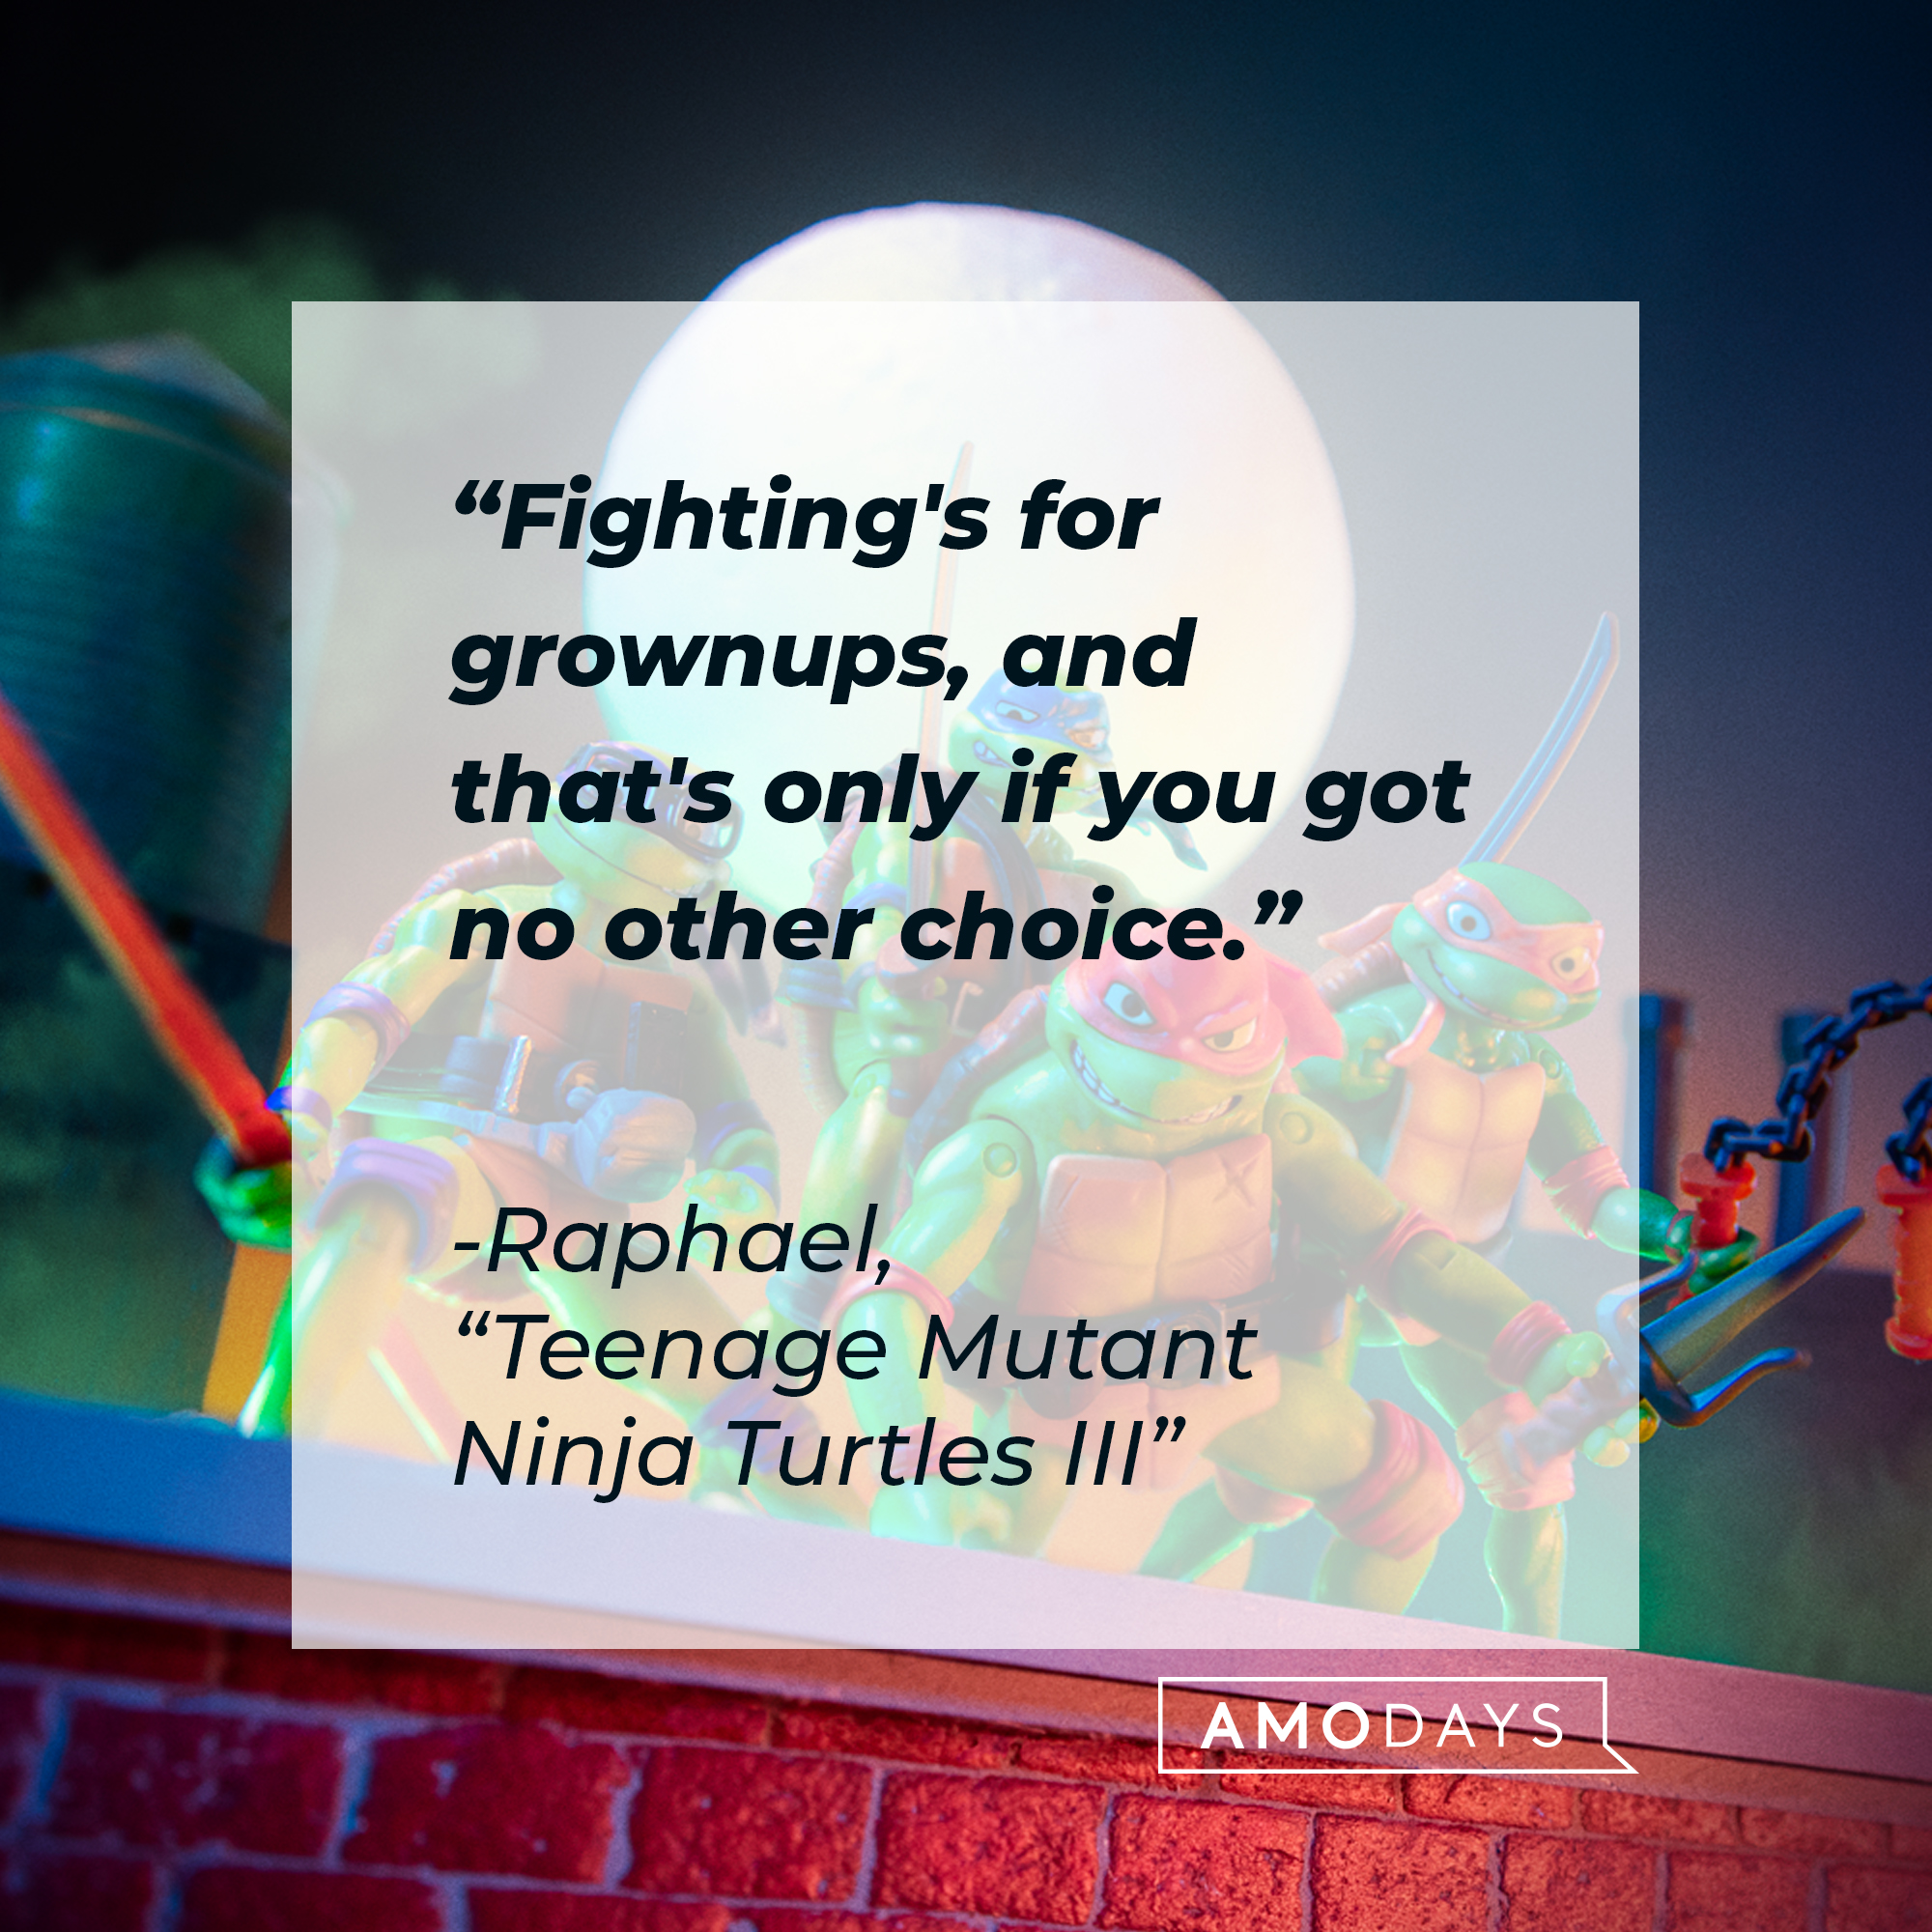 Raphael's quote: "Fighting's for grownups, and that's only if you got no other choice." | Source: facebook.com/TMNT